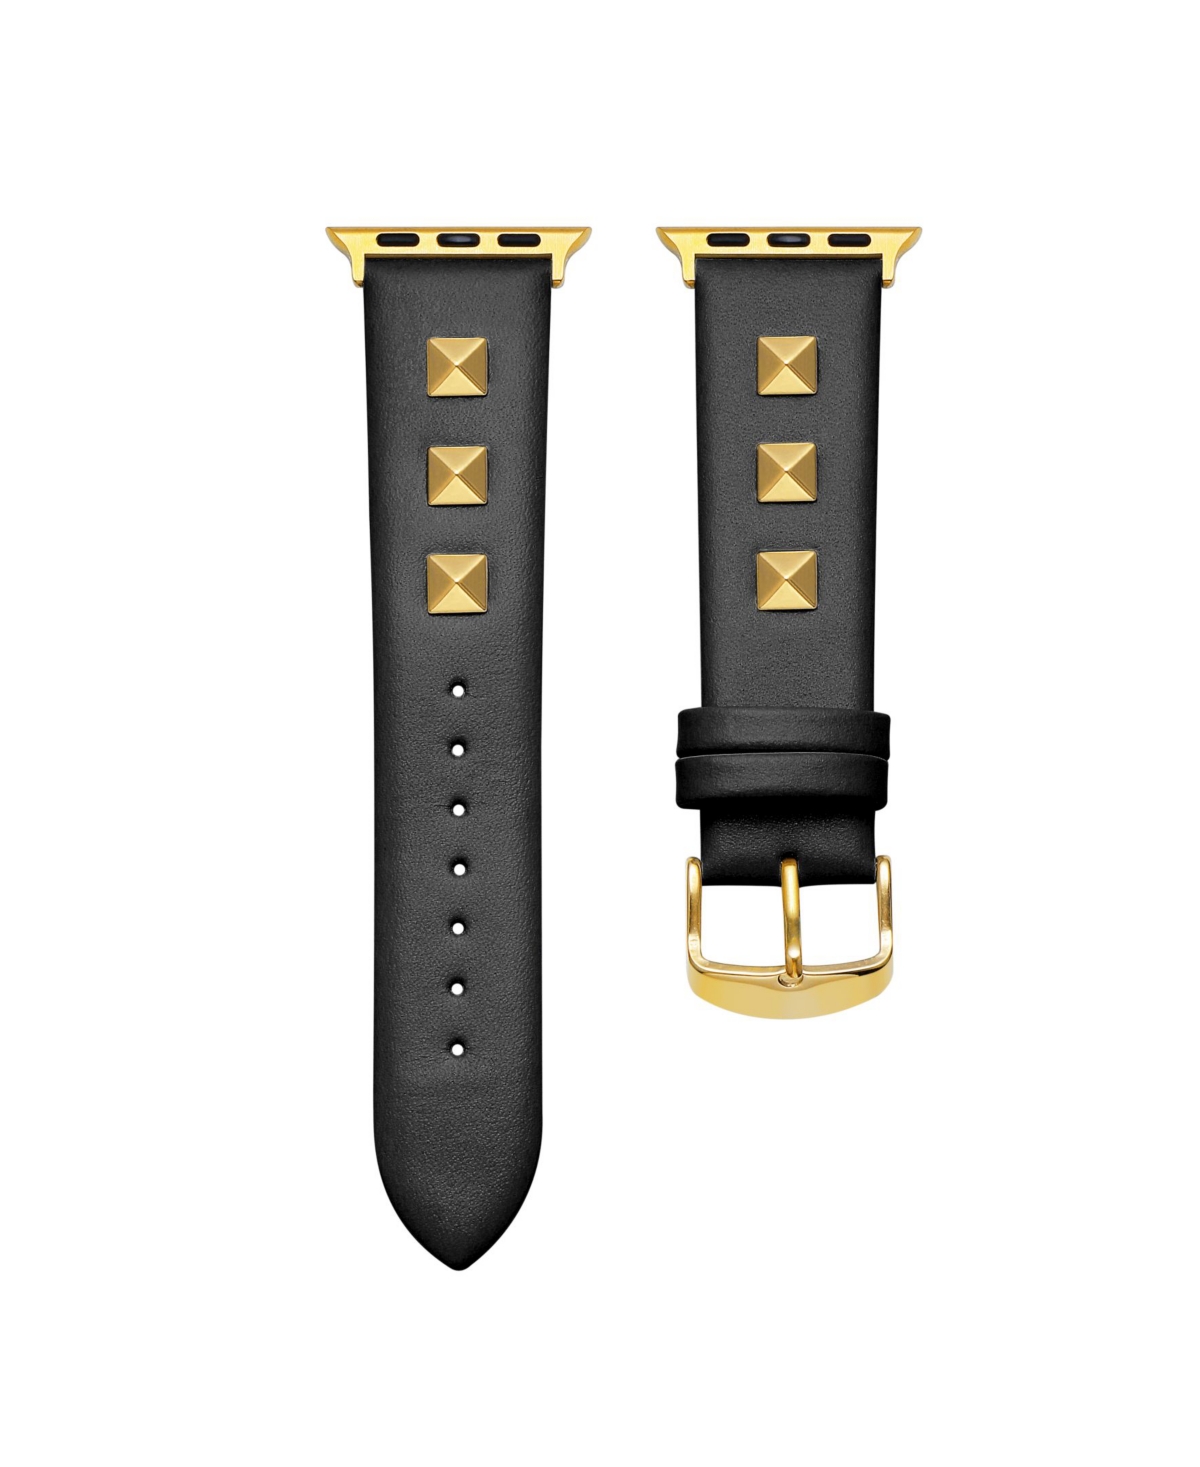 Rebel Black Genuine Leather and Stud Band for Apple Watch, 42mm-44mm - Black, Gold-tone